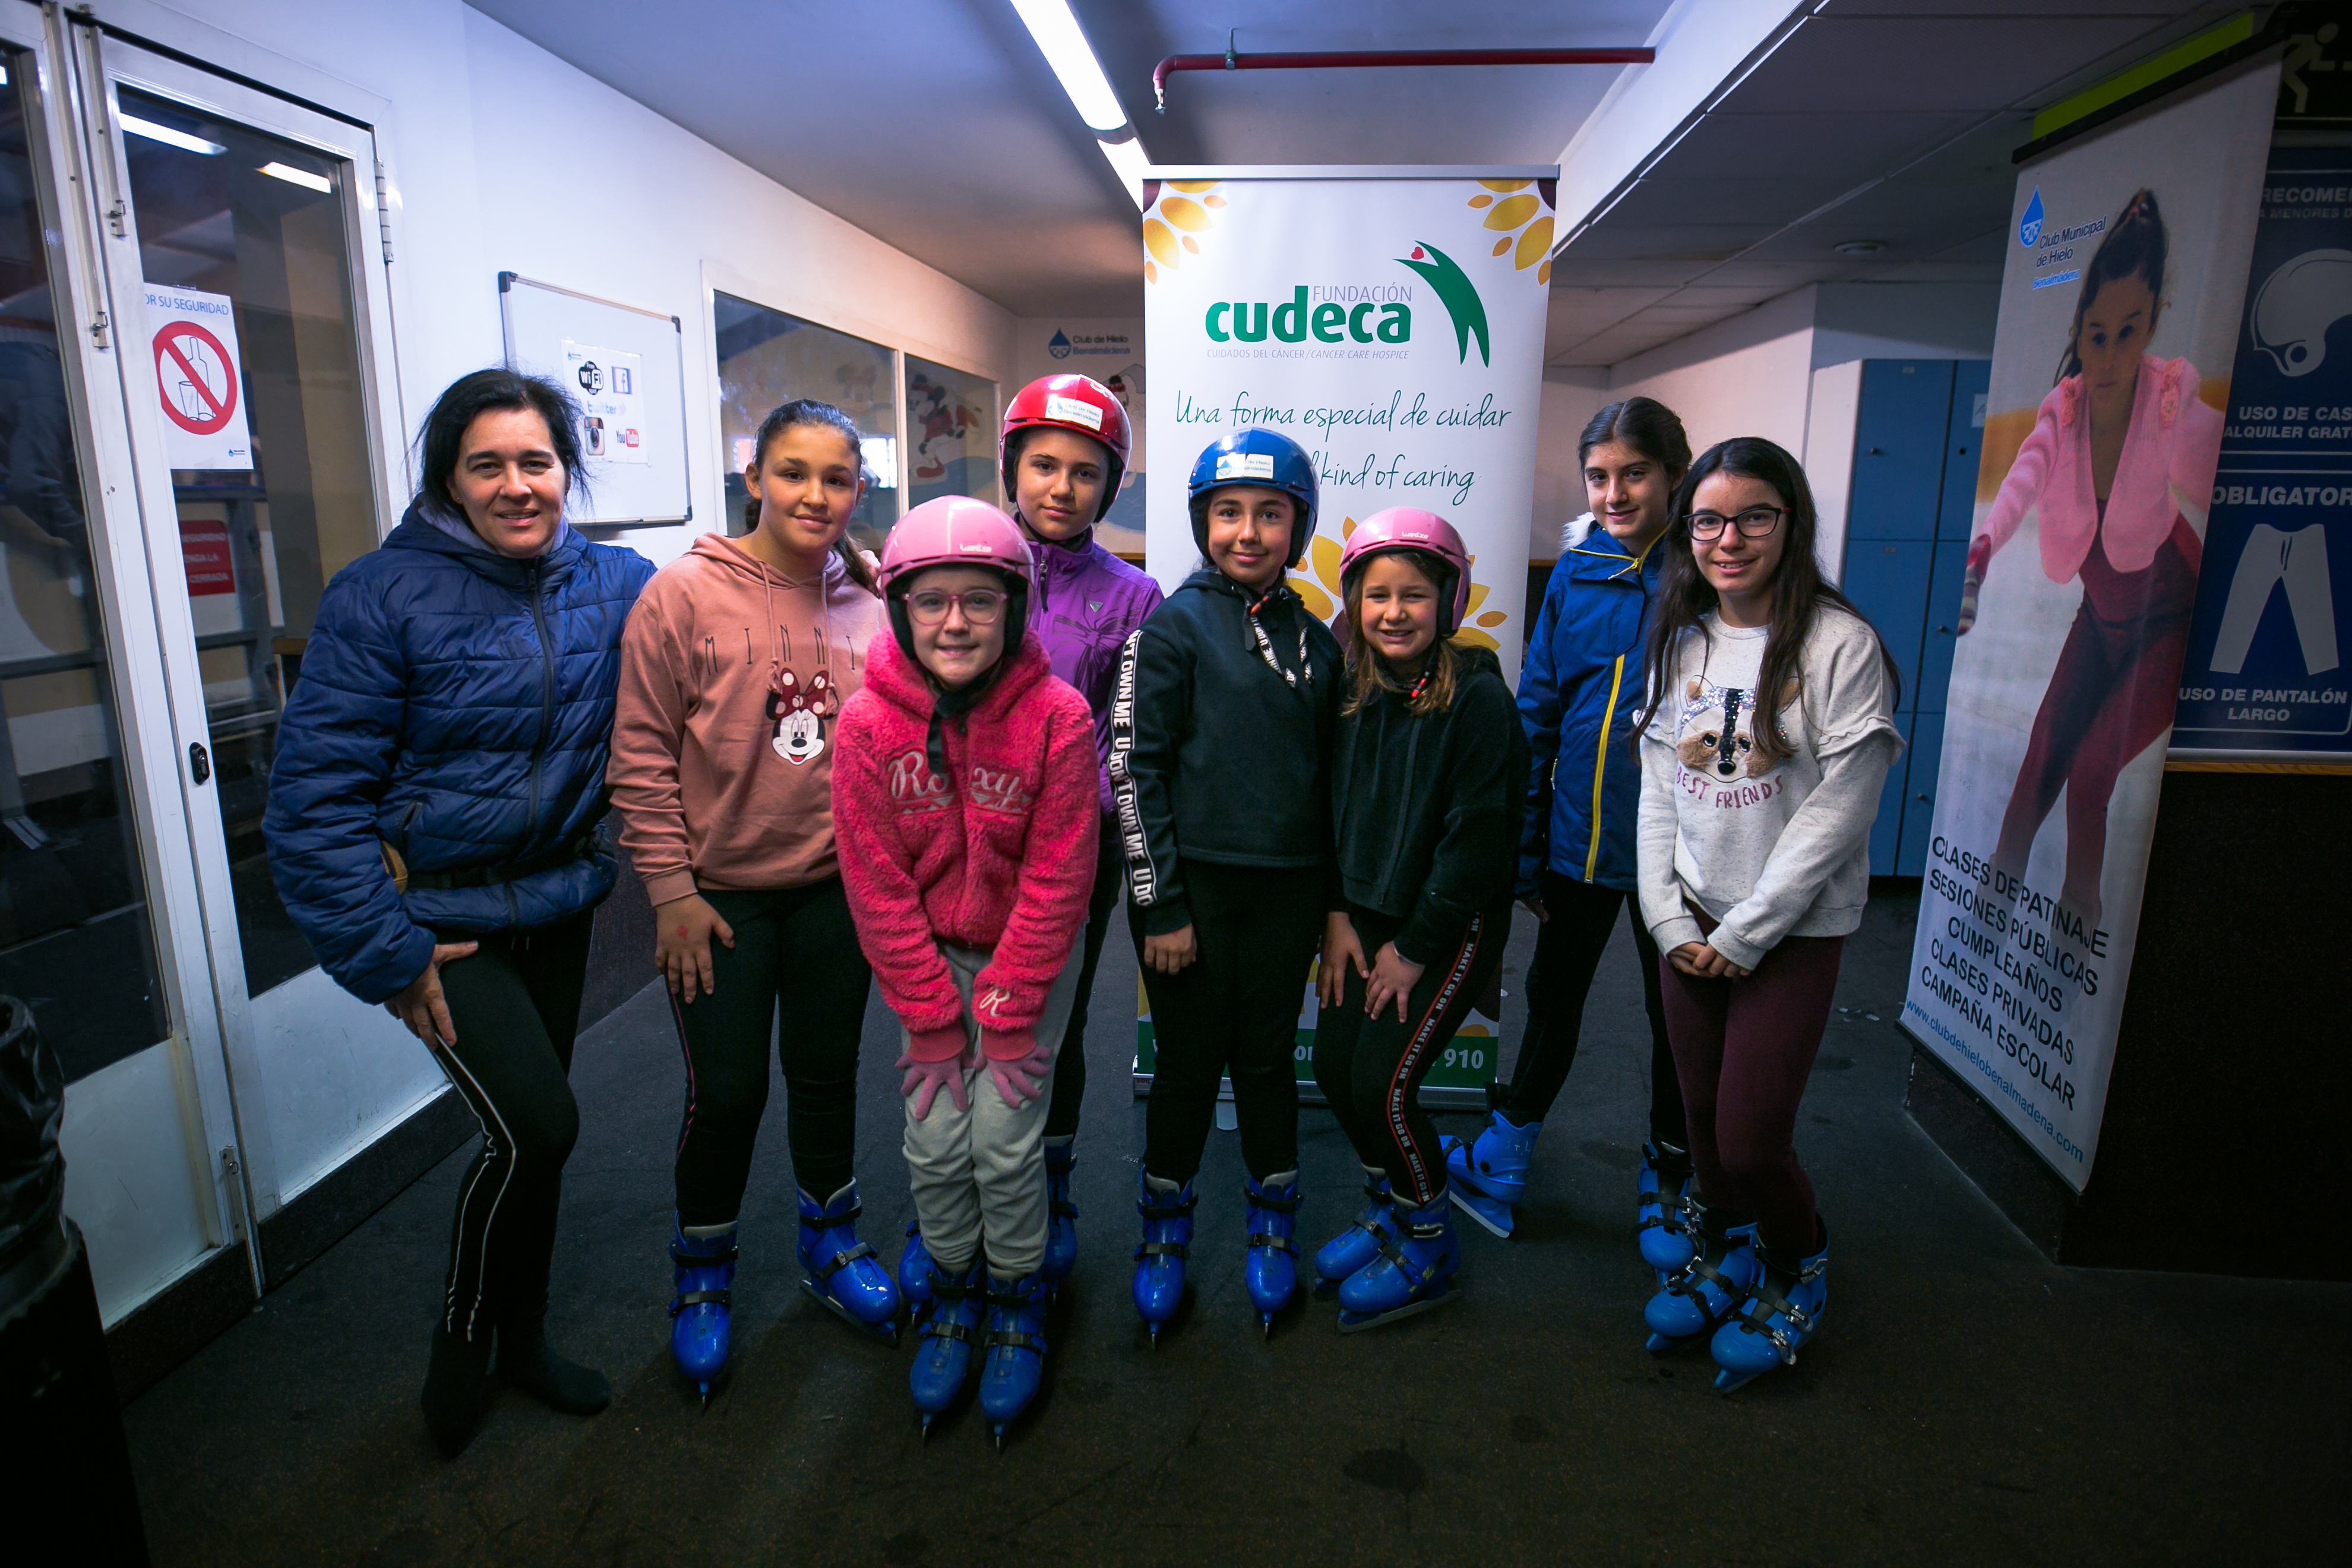 Ice Skating in aid of Cudeca 2019